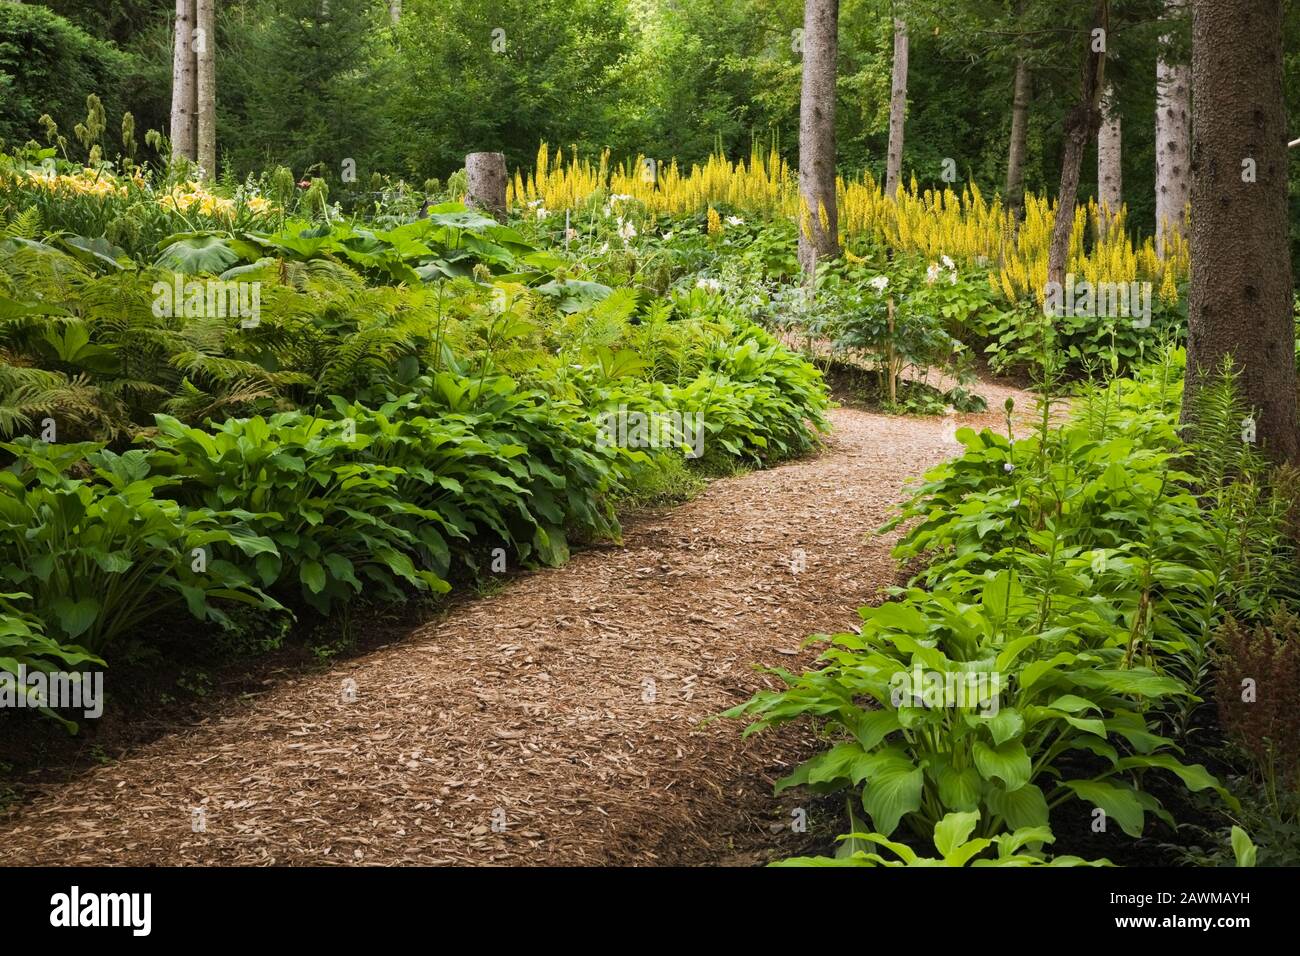 Cedar mulch path through borders with 'Honey Bell' and yellow Ligularia 'The Rocket' flowers in front yard country garden in summer. Stock Photo